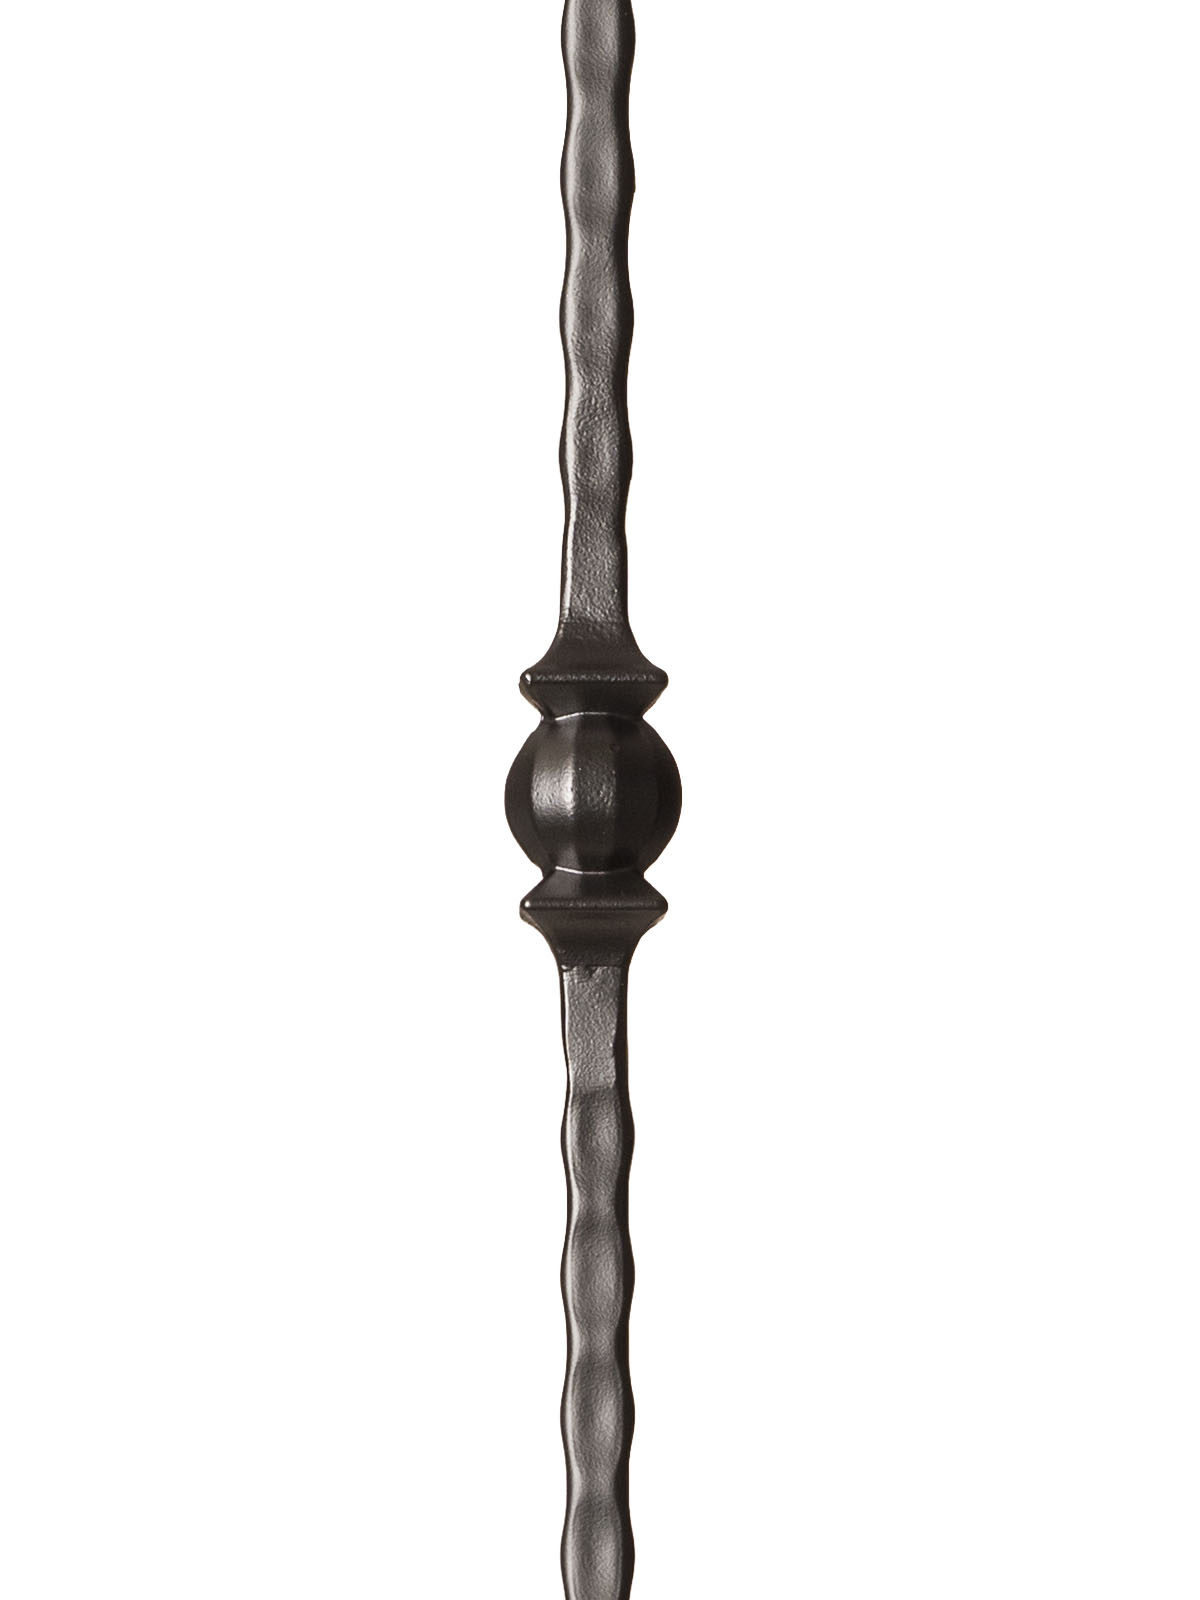 Iron Baluster 9032 - 9/16" Hammered Face - Single Ball